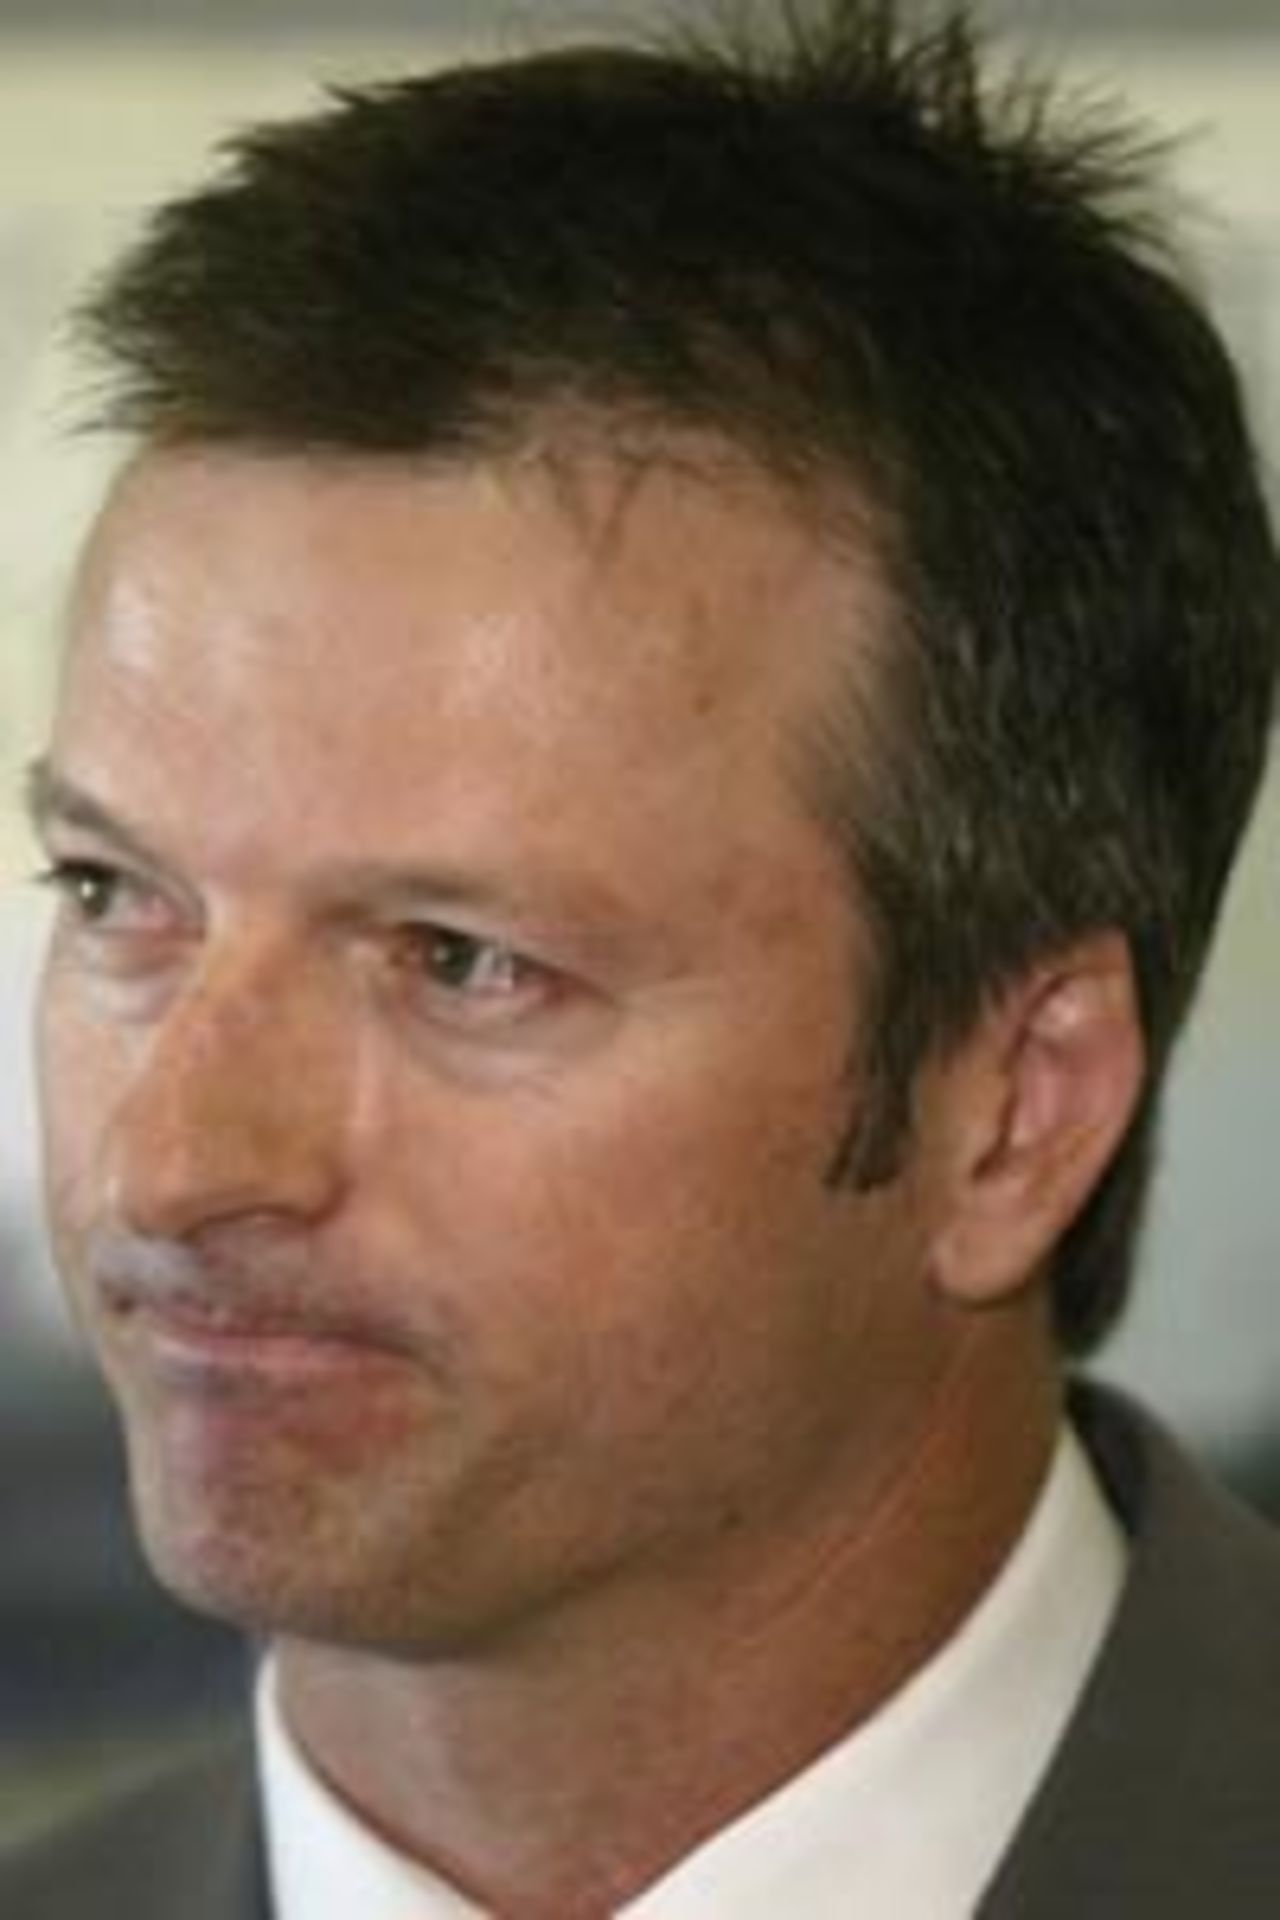 Steve Waugh speaks to media during the Steve Waugh 'Never Say Die' book launch at the Sydney Cricket Ground on October 29, 2003 in Sydney, Australia.